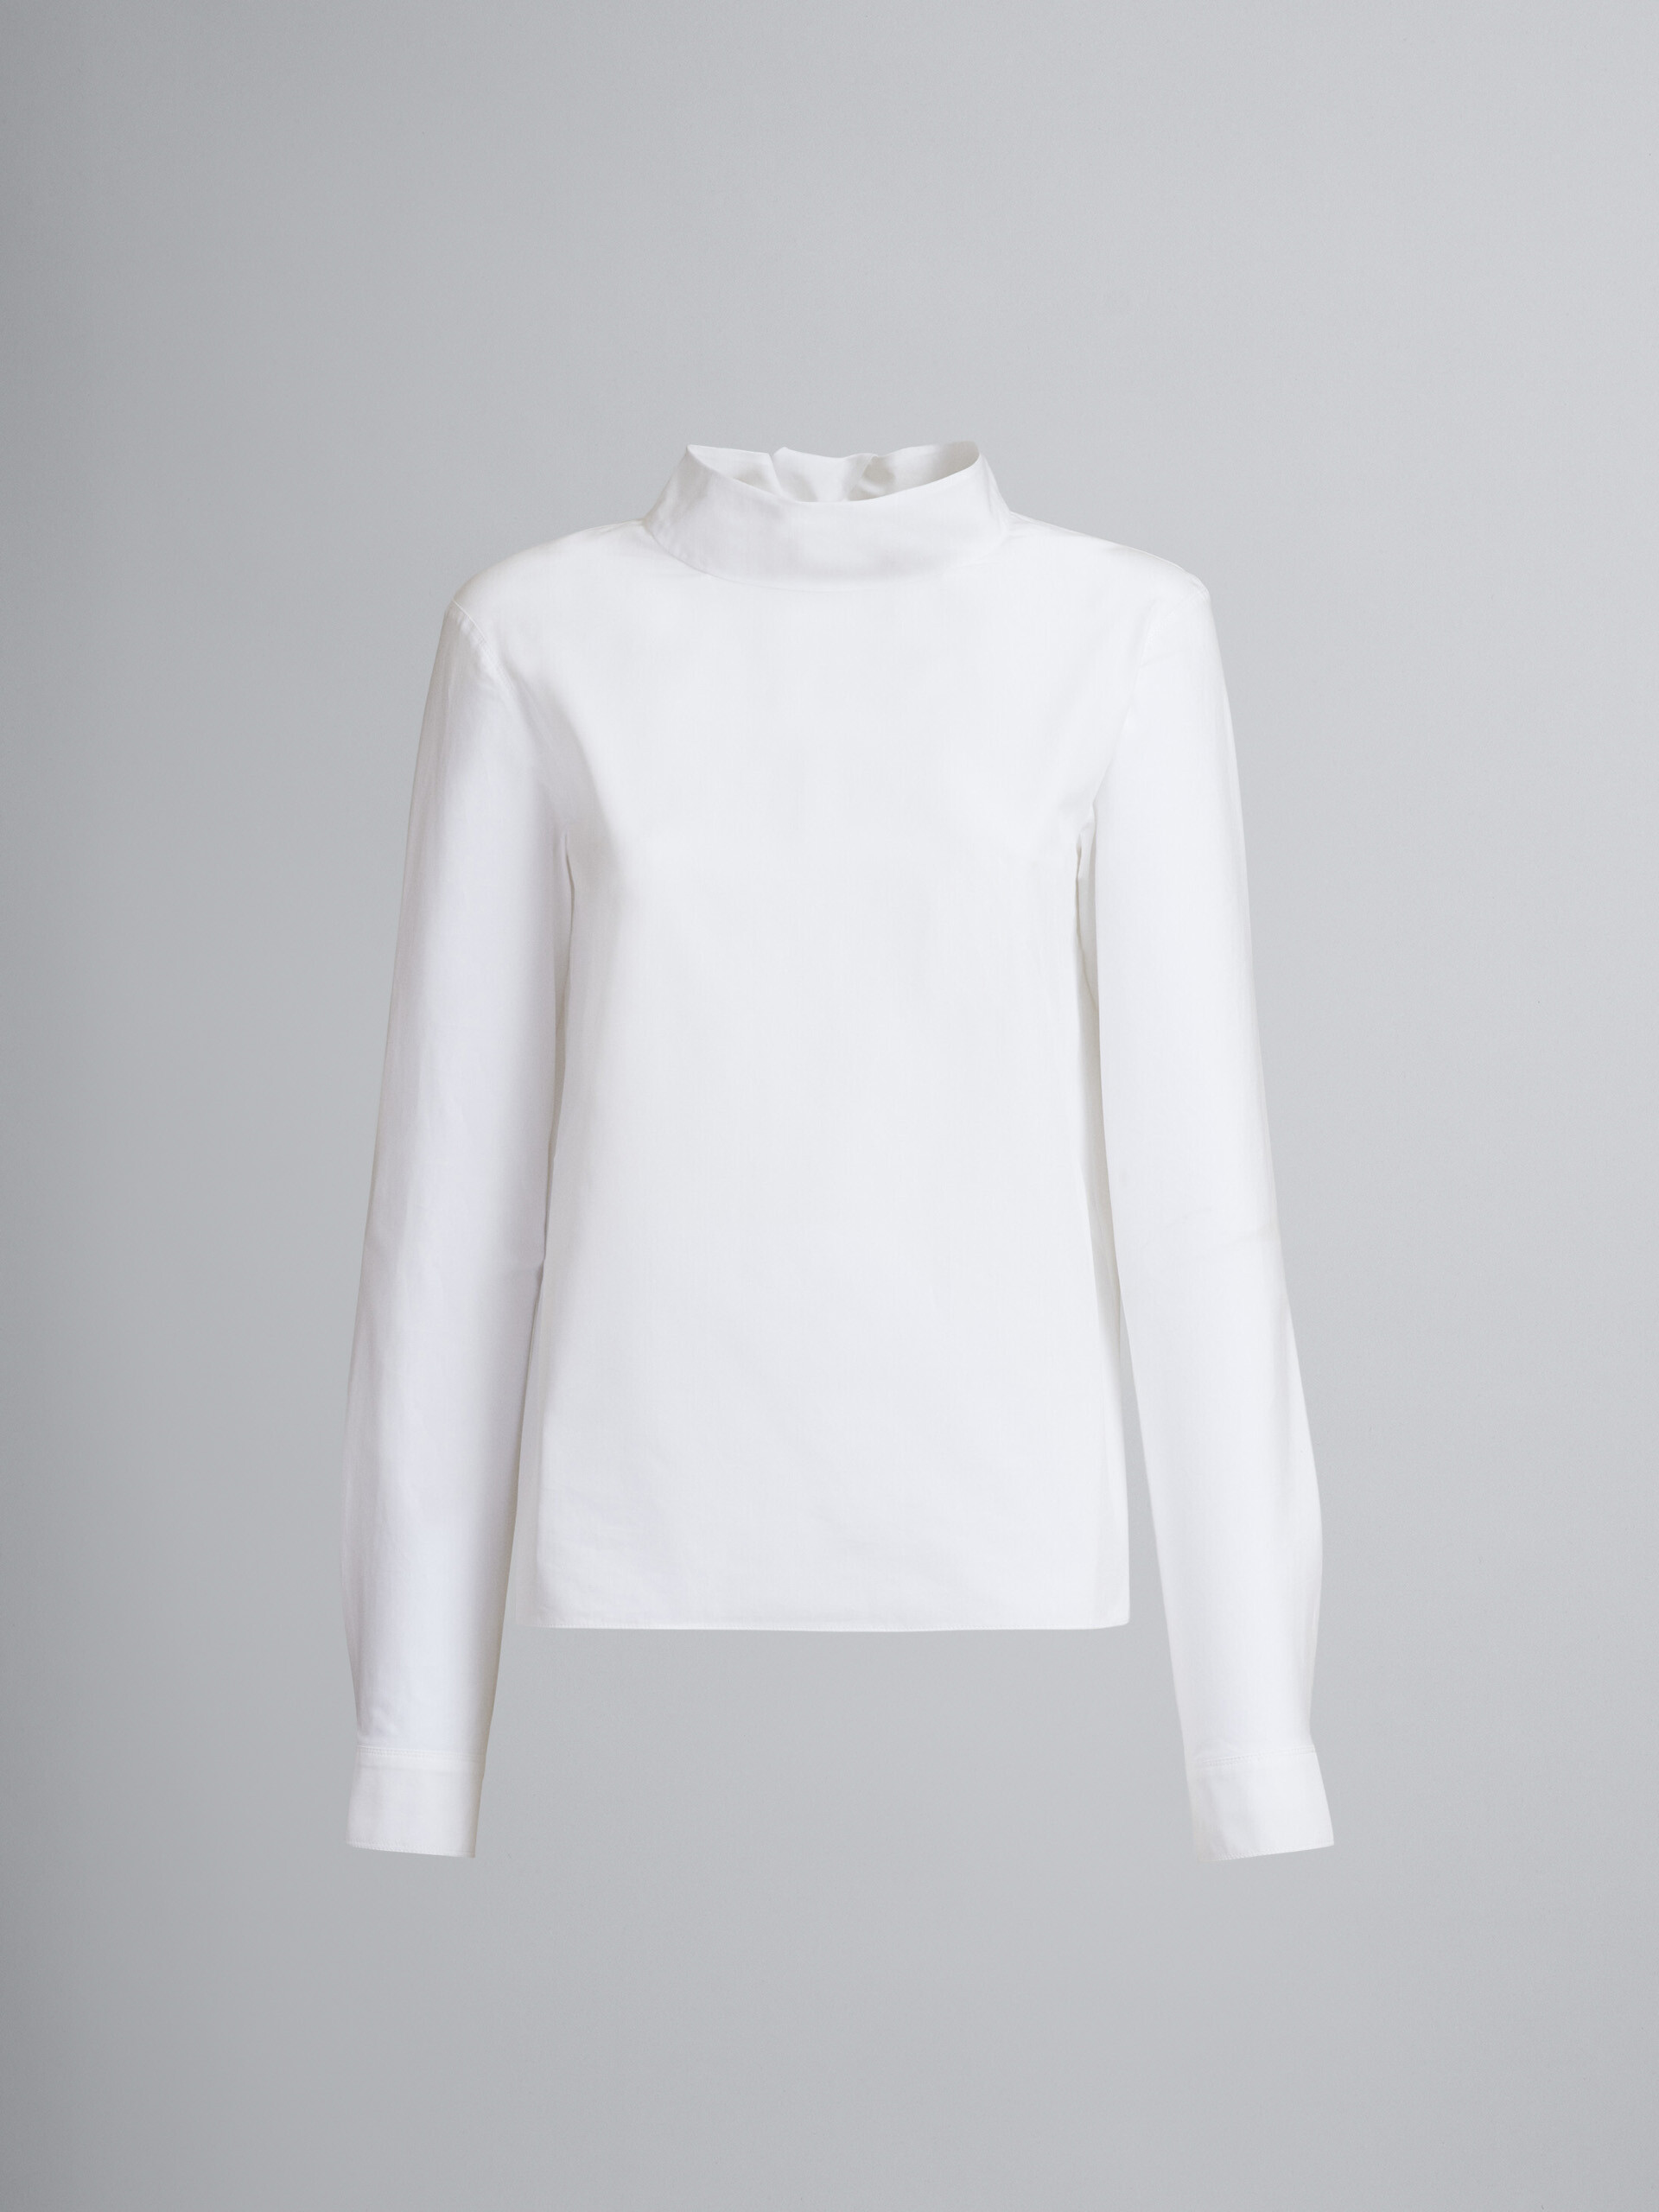 White cotton poplin blouse with lavallière collar knotted on the back - Shirts - Image 1